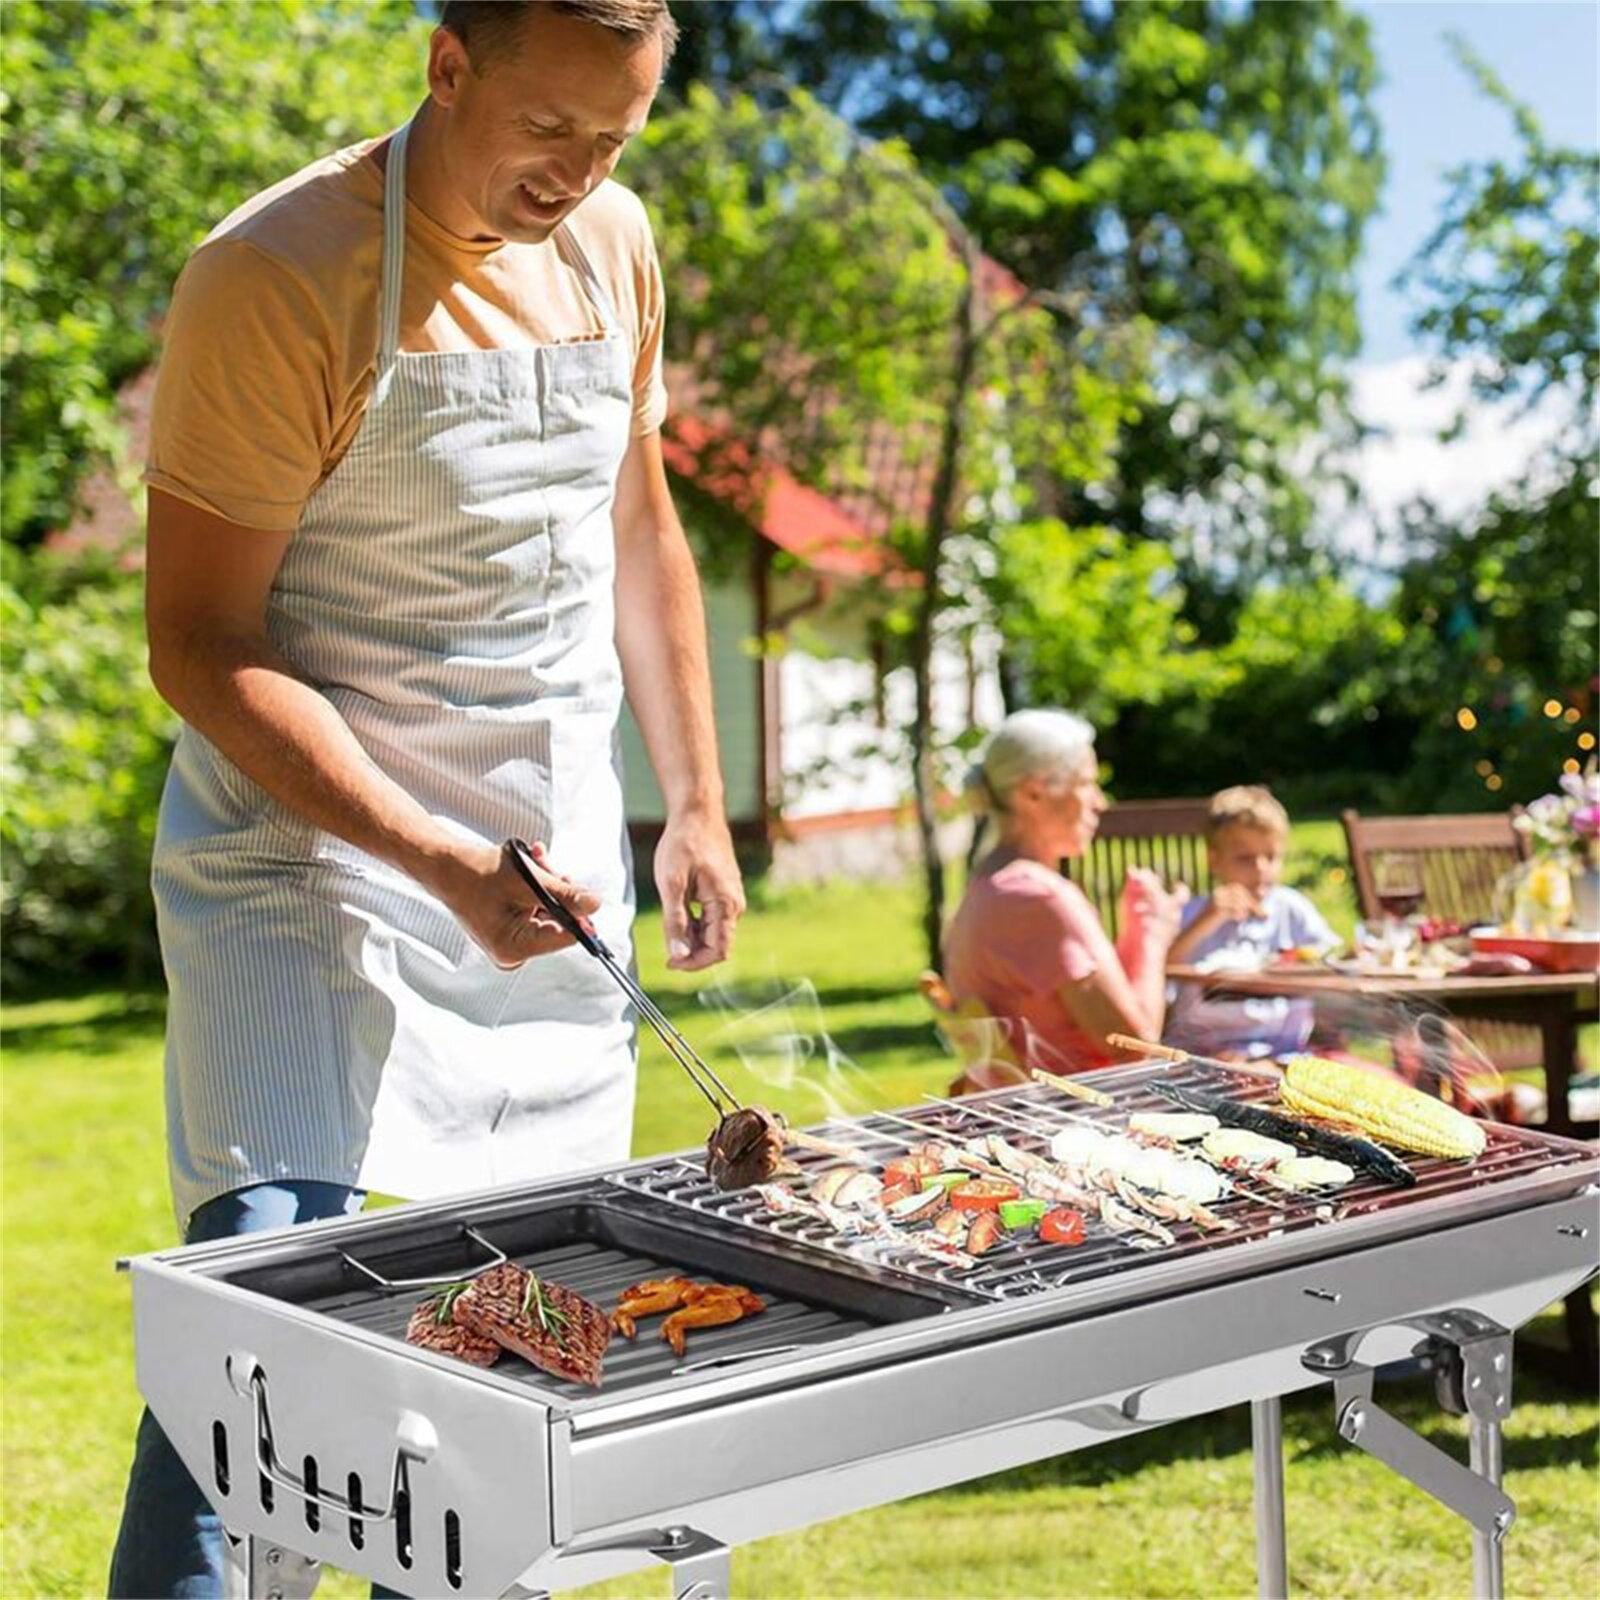 14" ROUND BARBECUE BBQ GRILL OUTDOOR CHARCOAL PATIO COOKING PORTABLE 